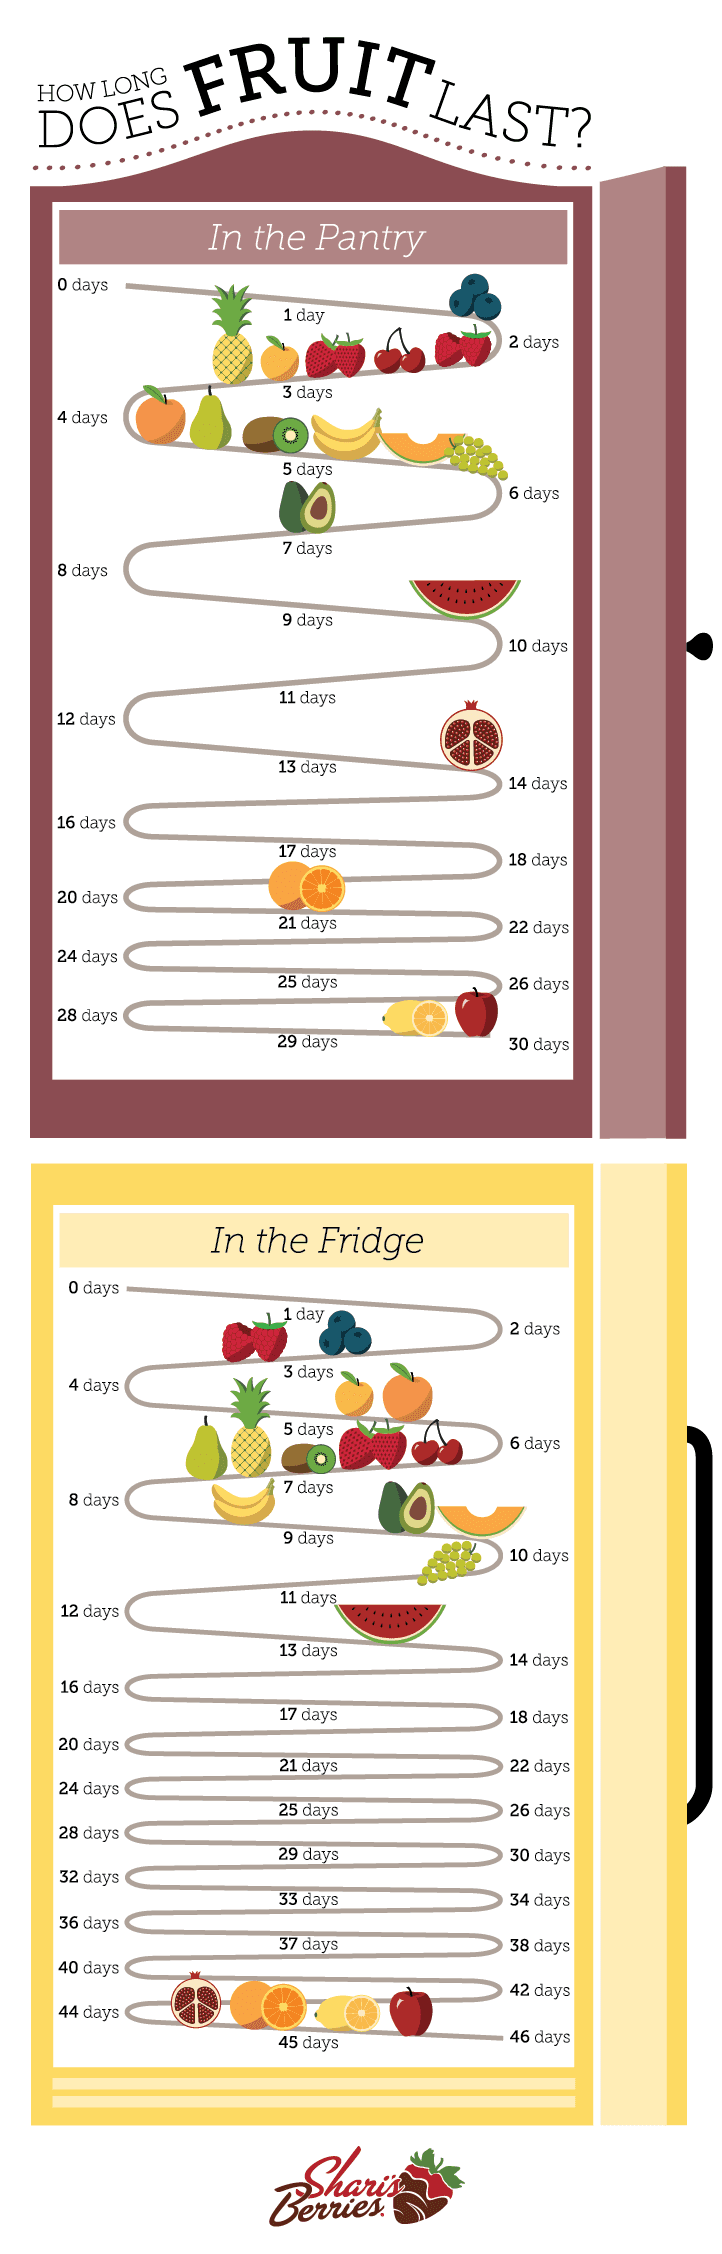 Graphic of how long fruit lasts by Shari